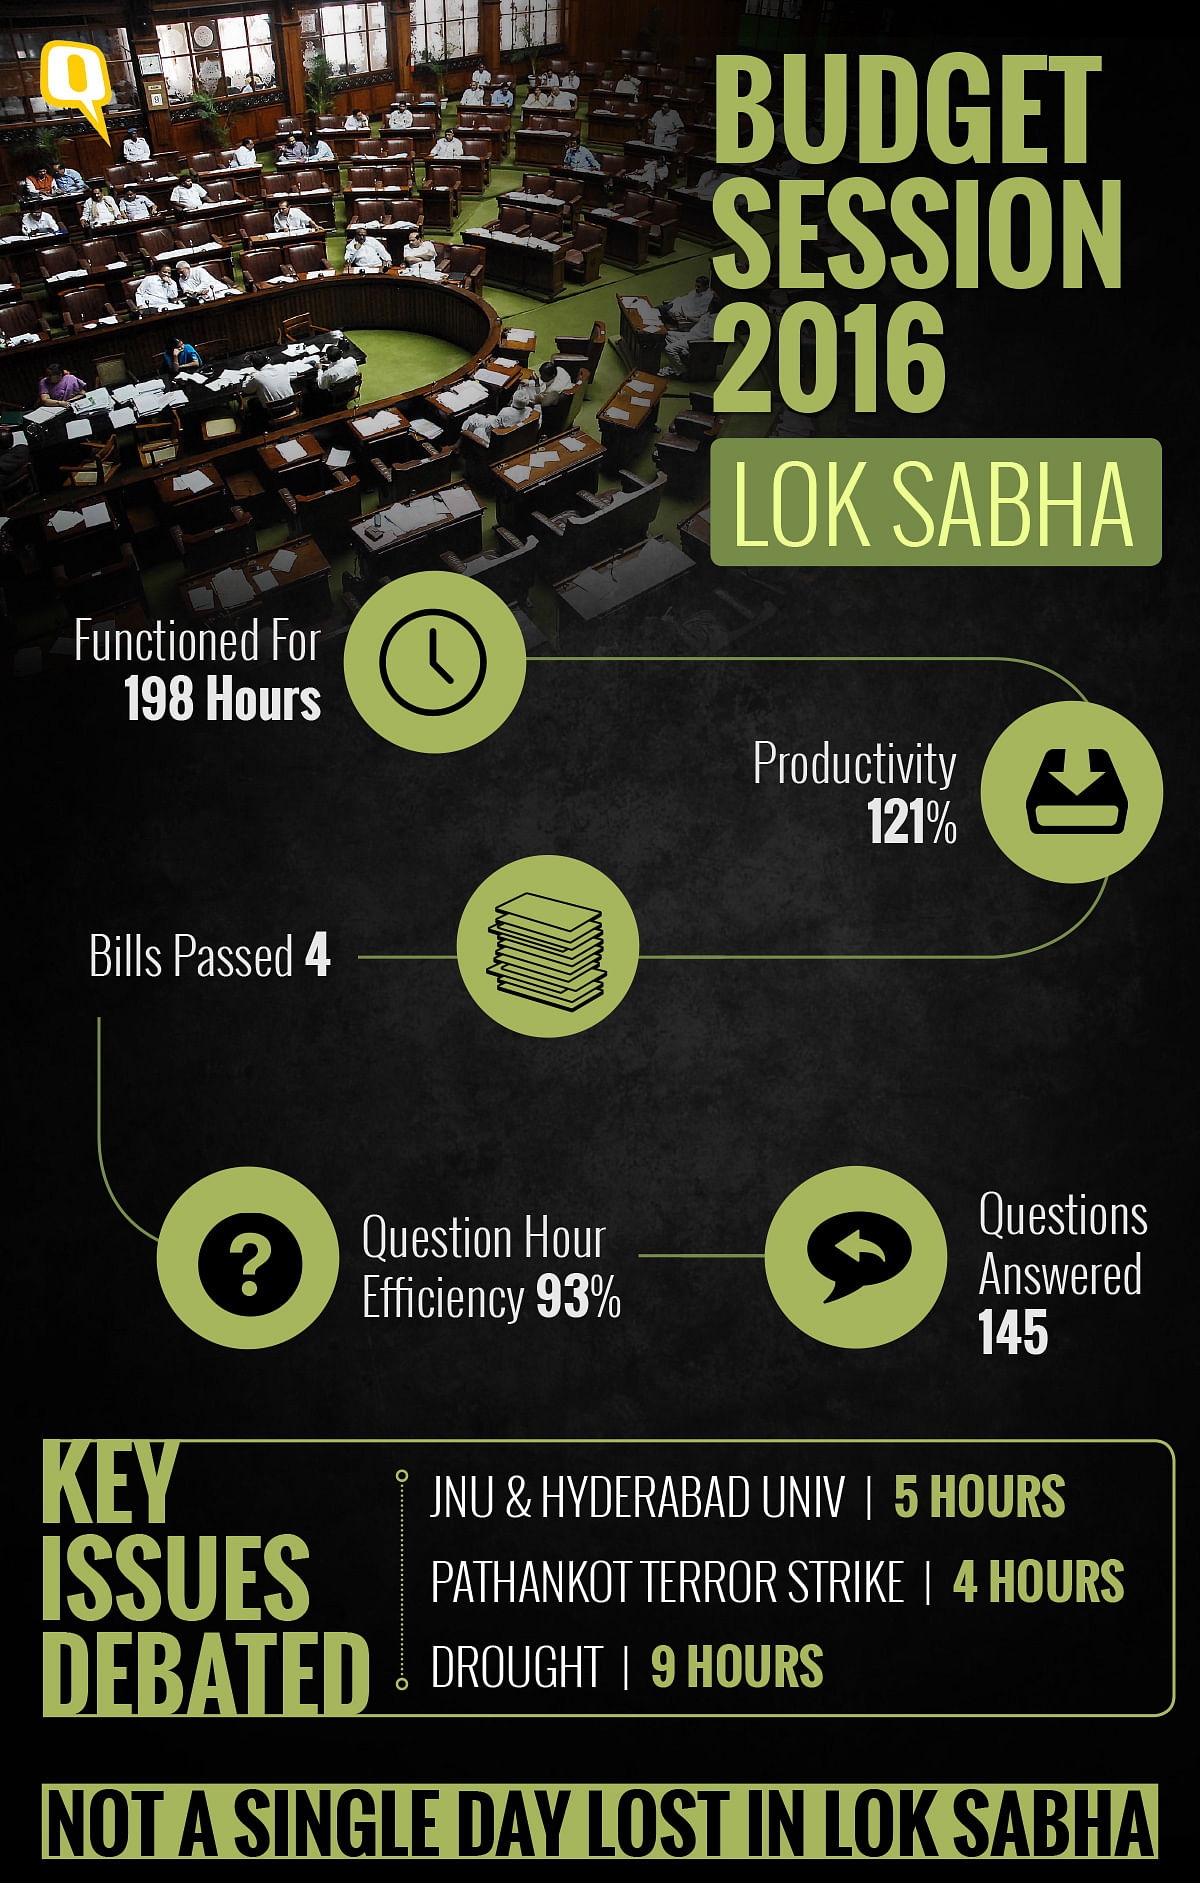 LS functioned for 198 hours and passed four bills, while the RS functioned for 150 hours and passed 11 bills.